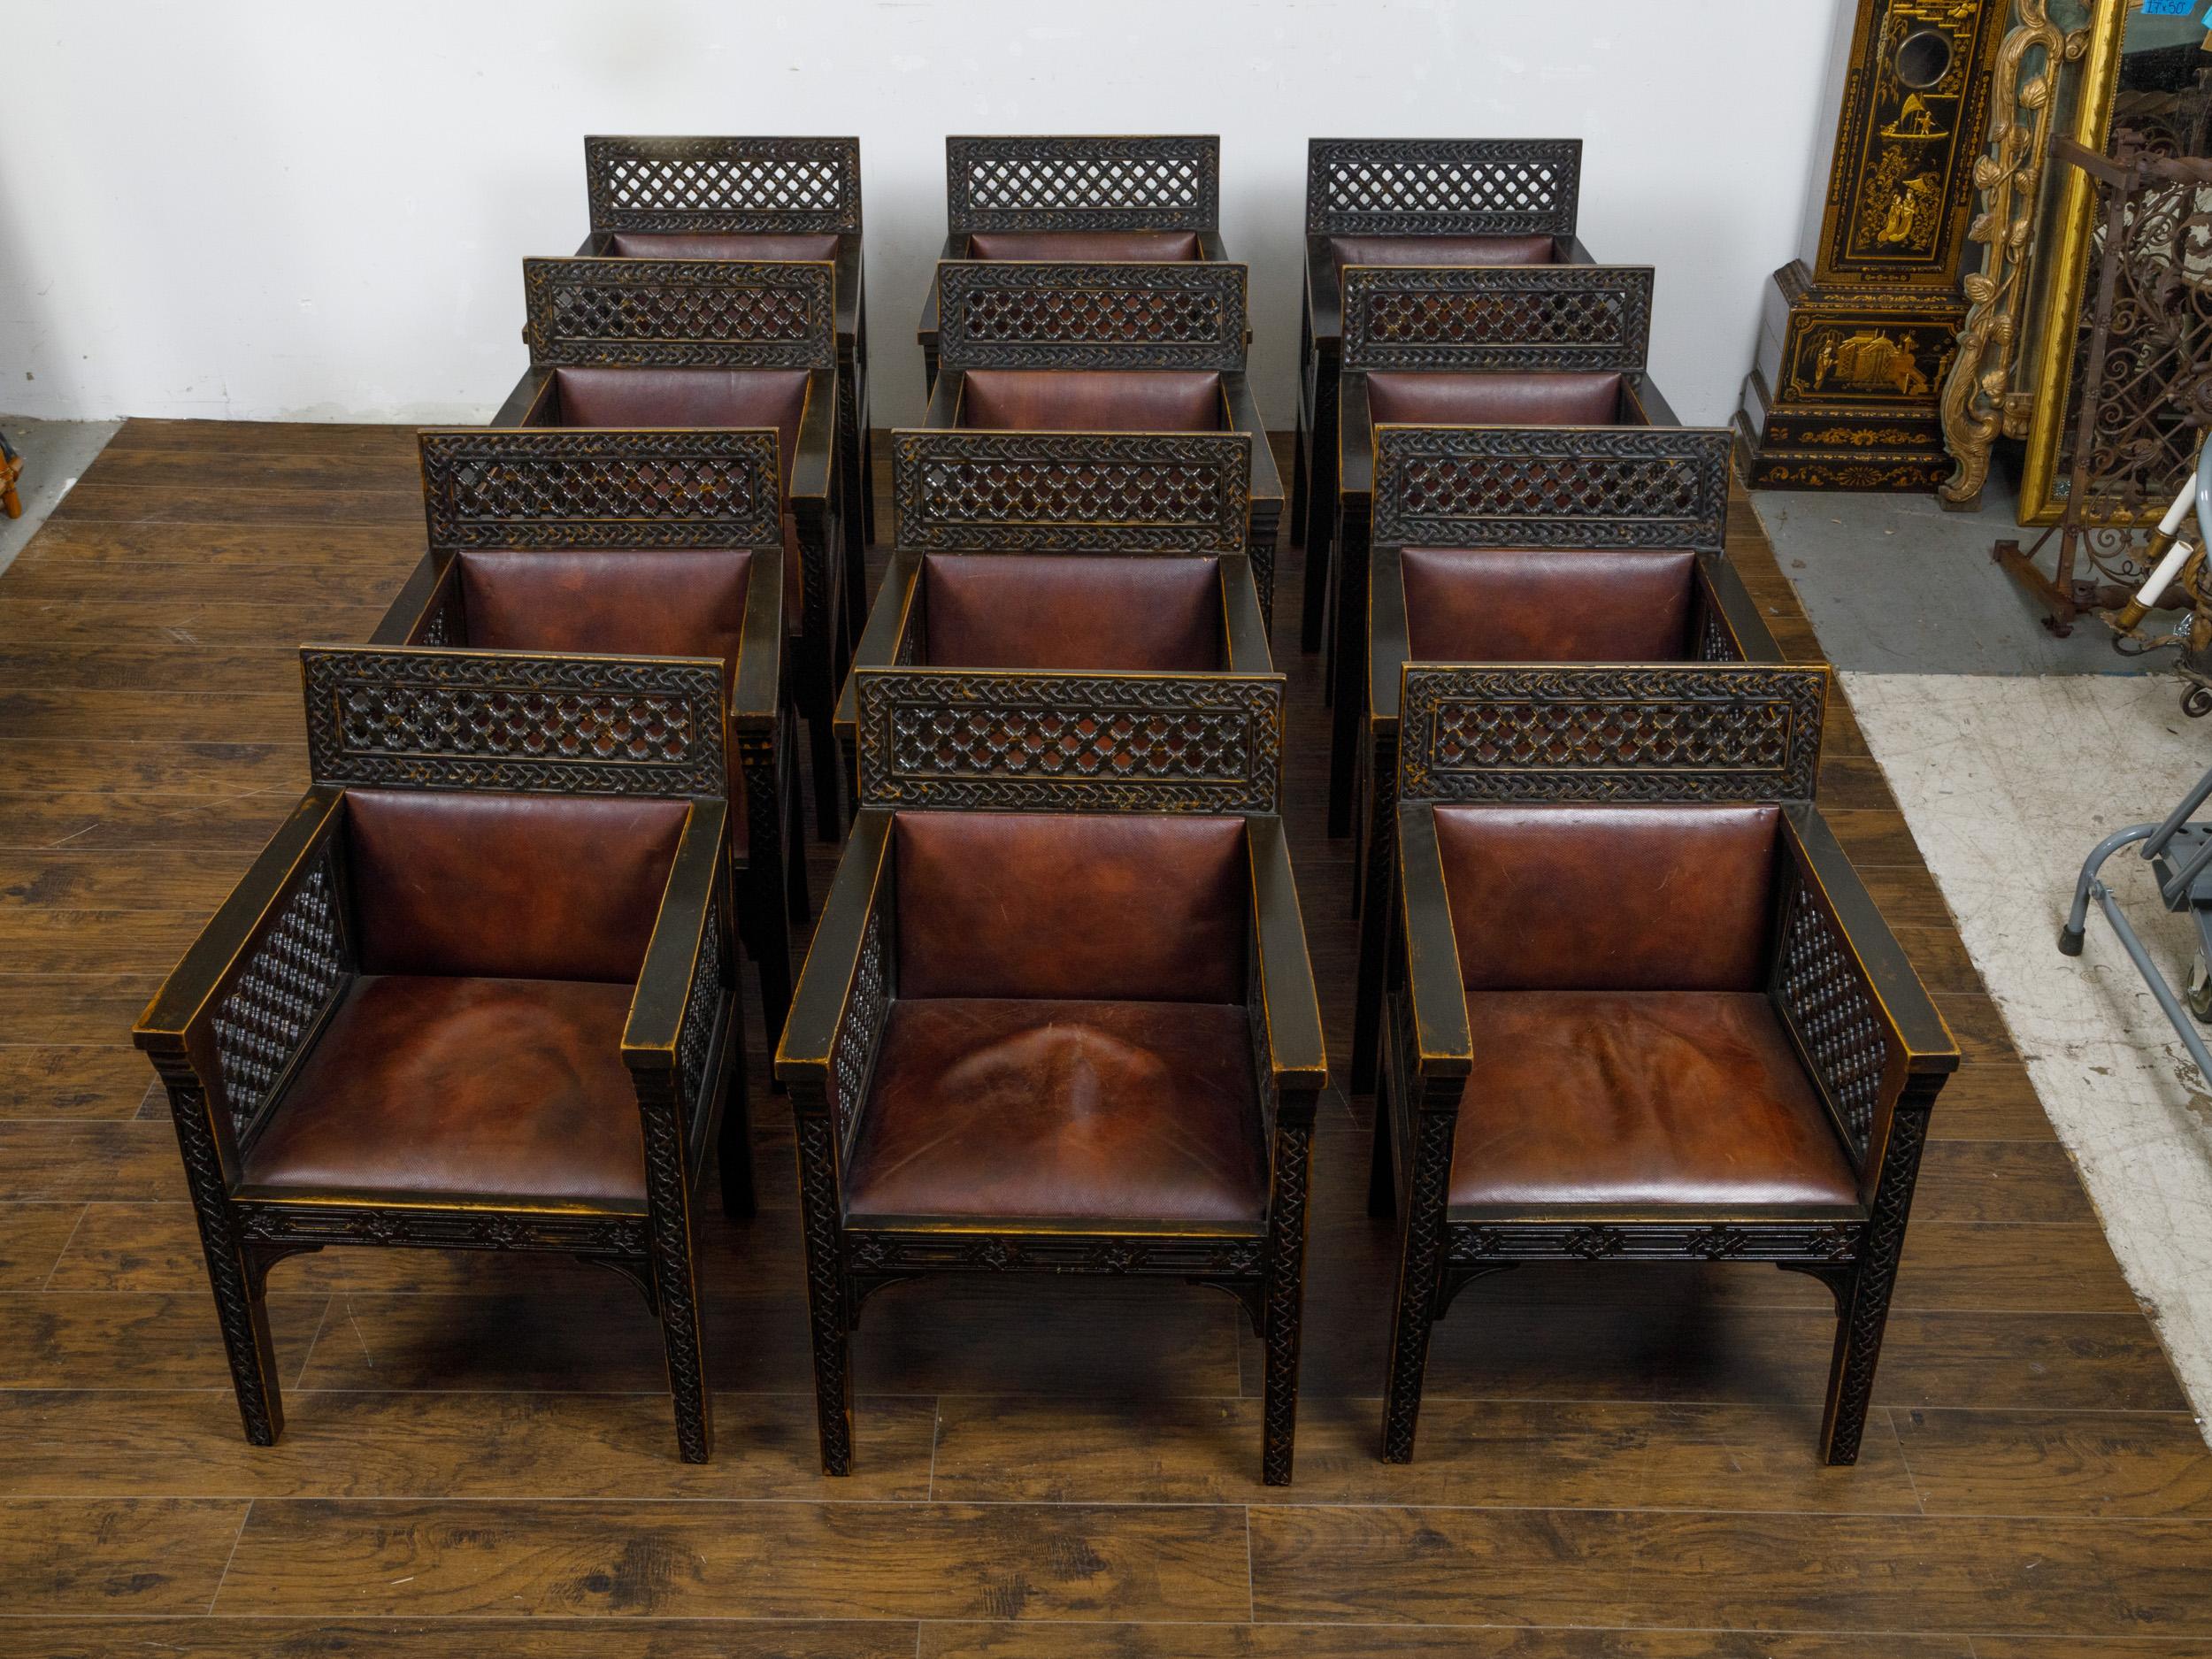 Set of 12 Moroccan Ebonized Carved Wood Armchairs with Leather Seats, circa 1900 In Good Condition For Sale In Atlanta, GA